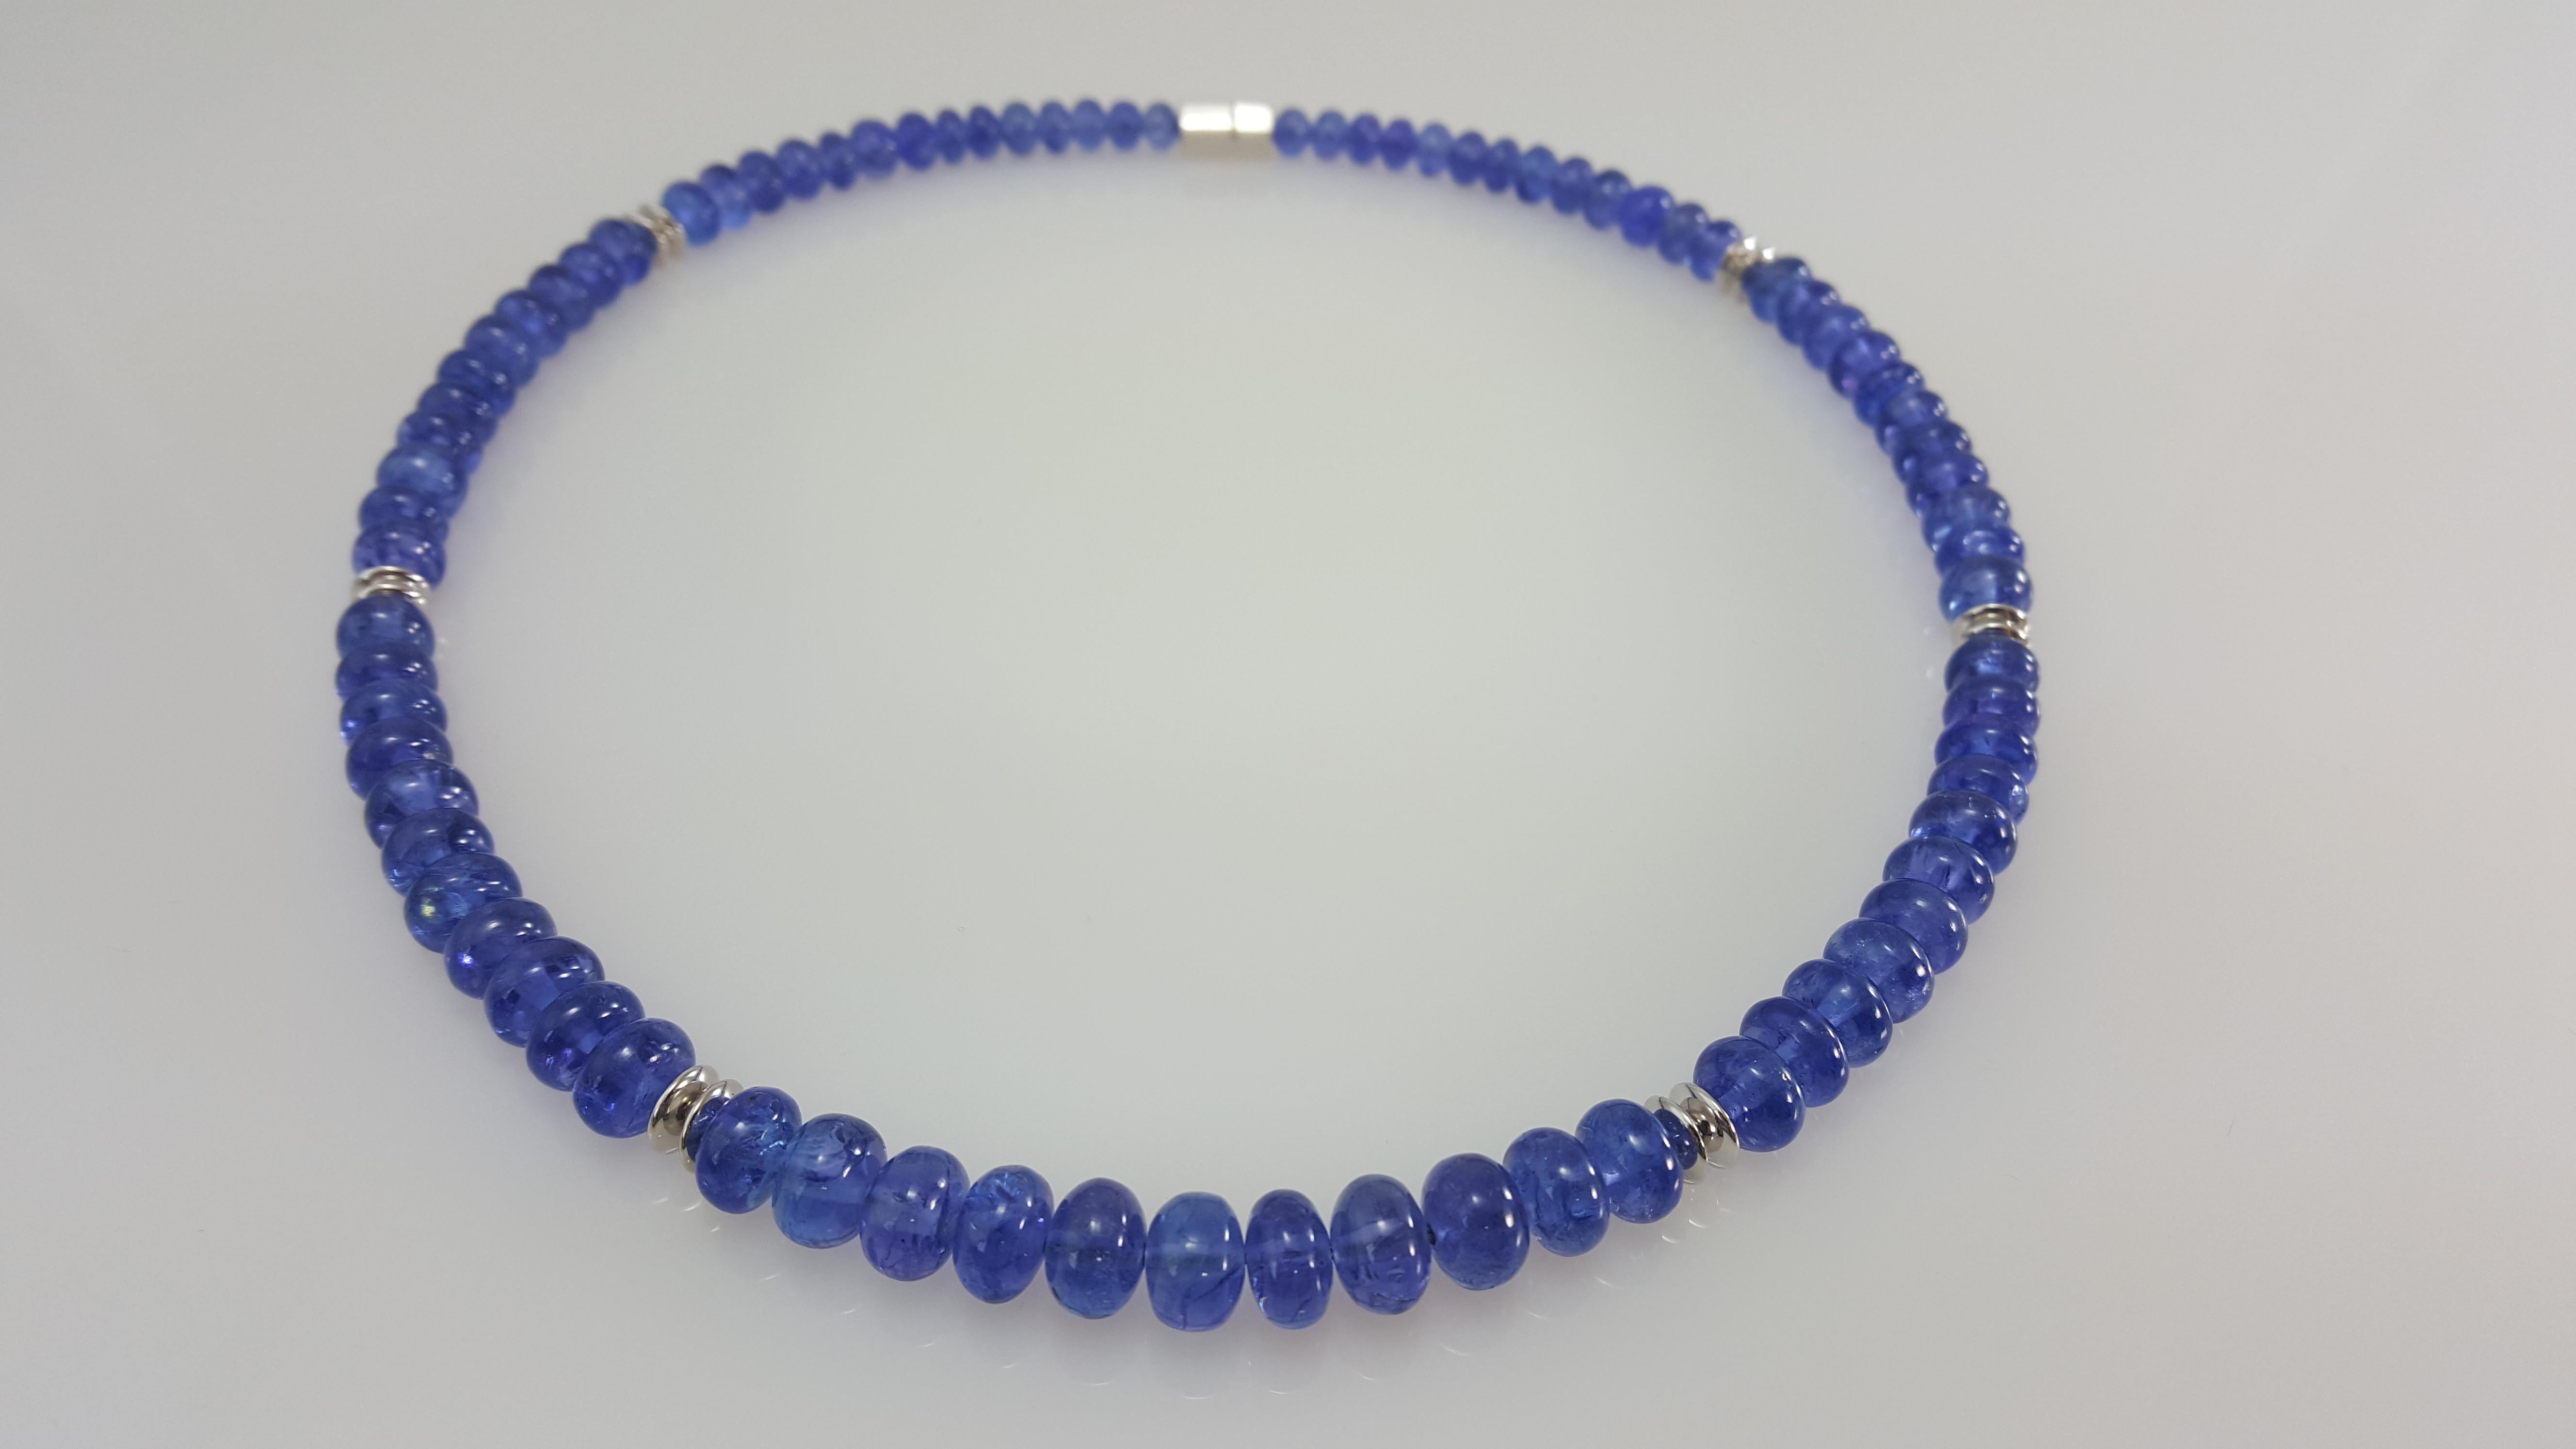 Cornflower Blue Tanzanite Rondel Beaded Necklace with 18 Carat White Gold 1